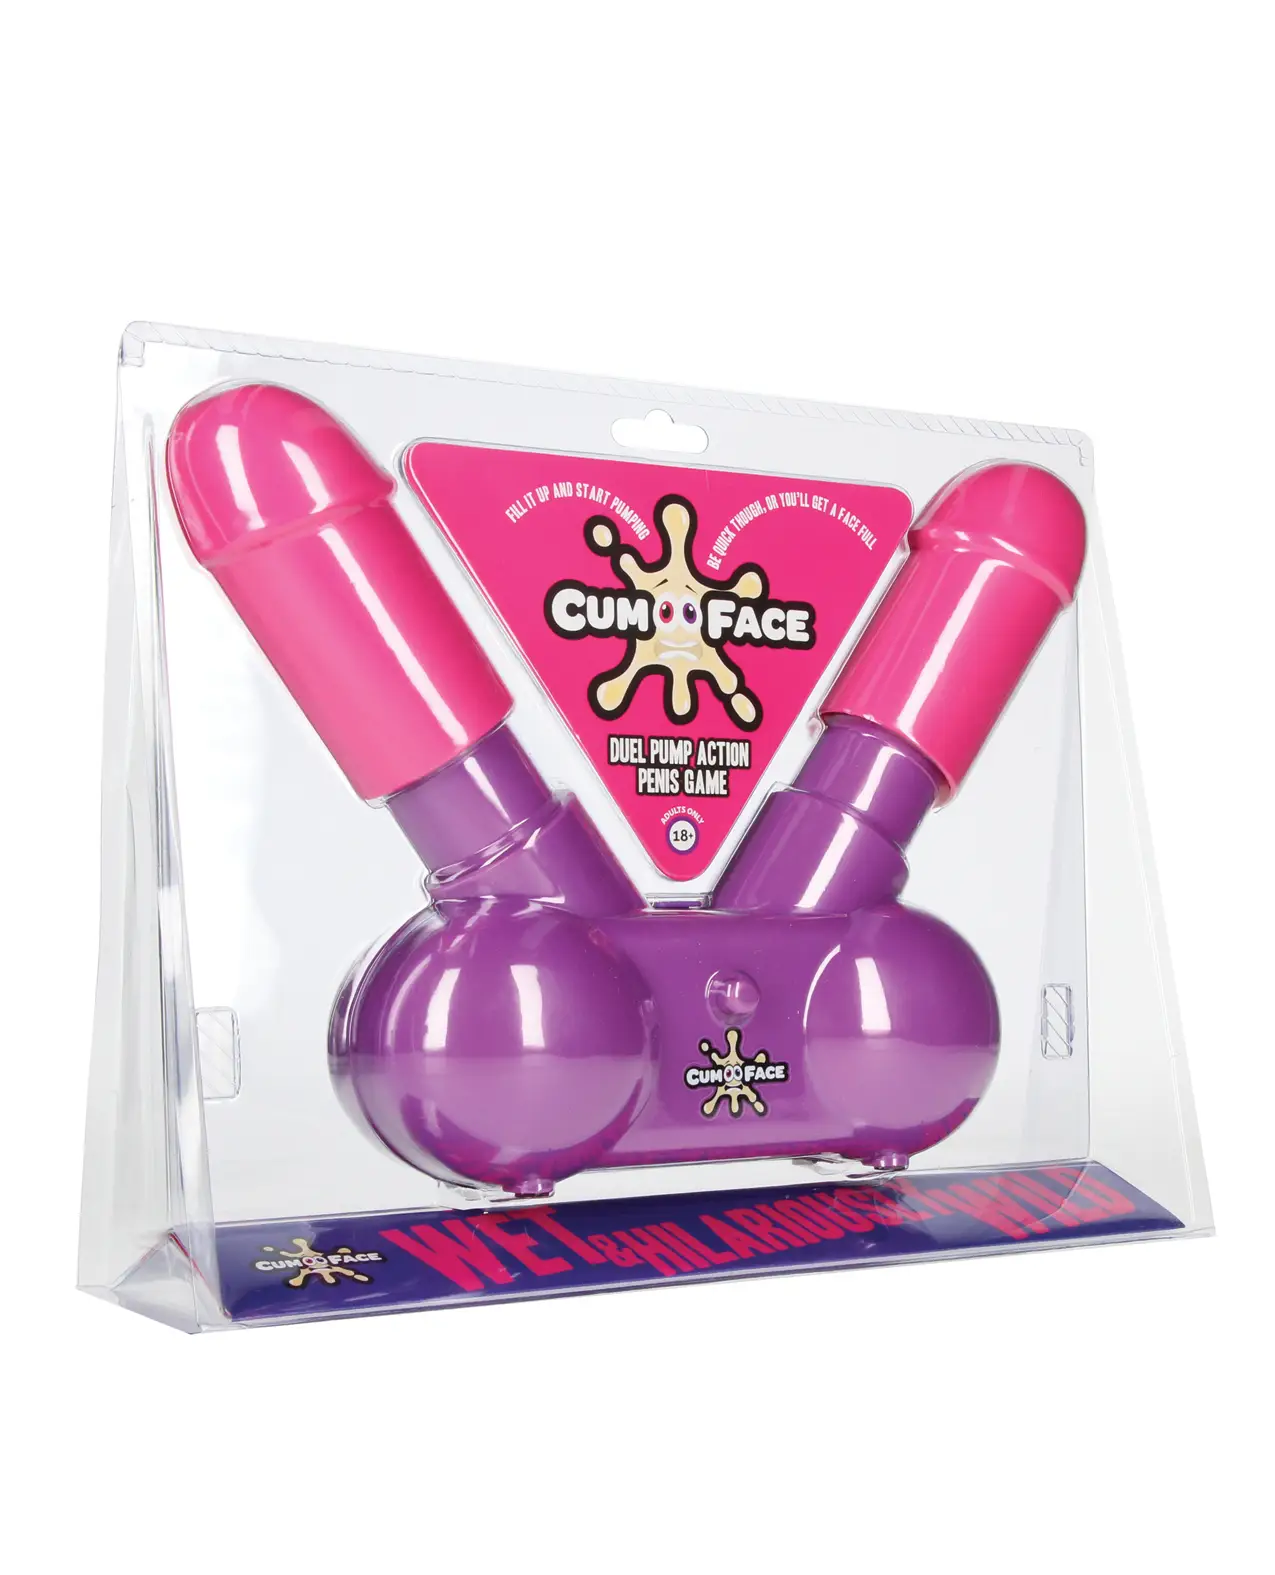 duel pump action penis game in clamshell packaging